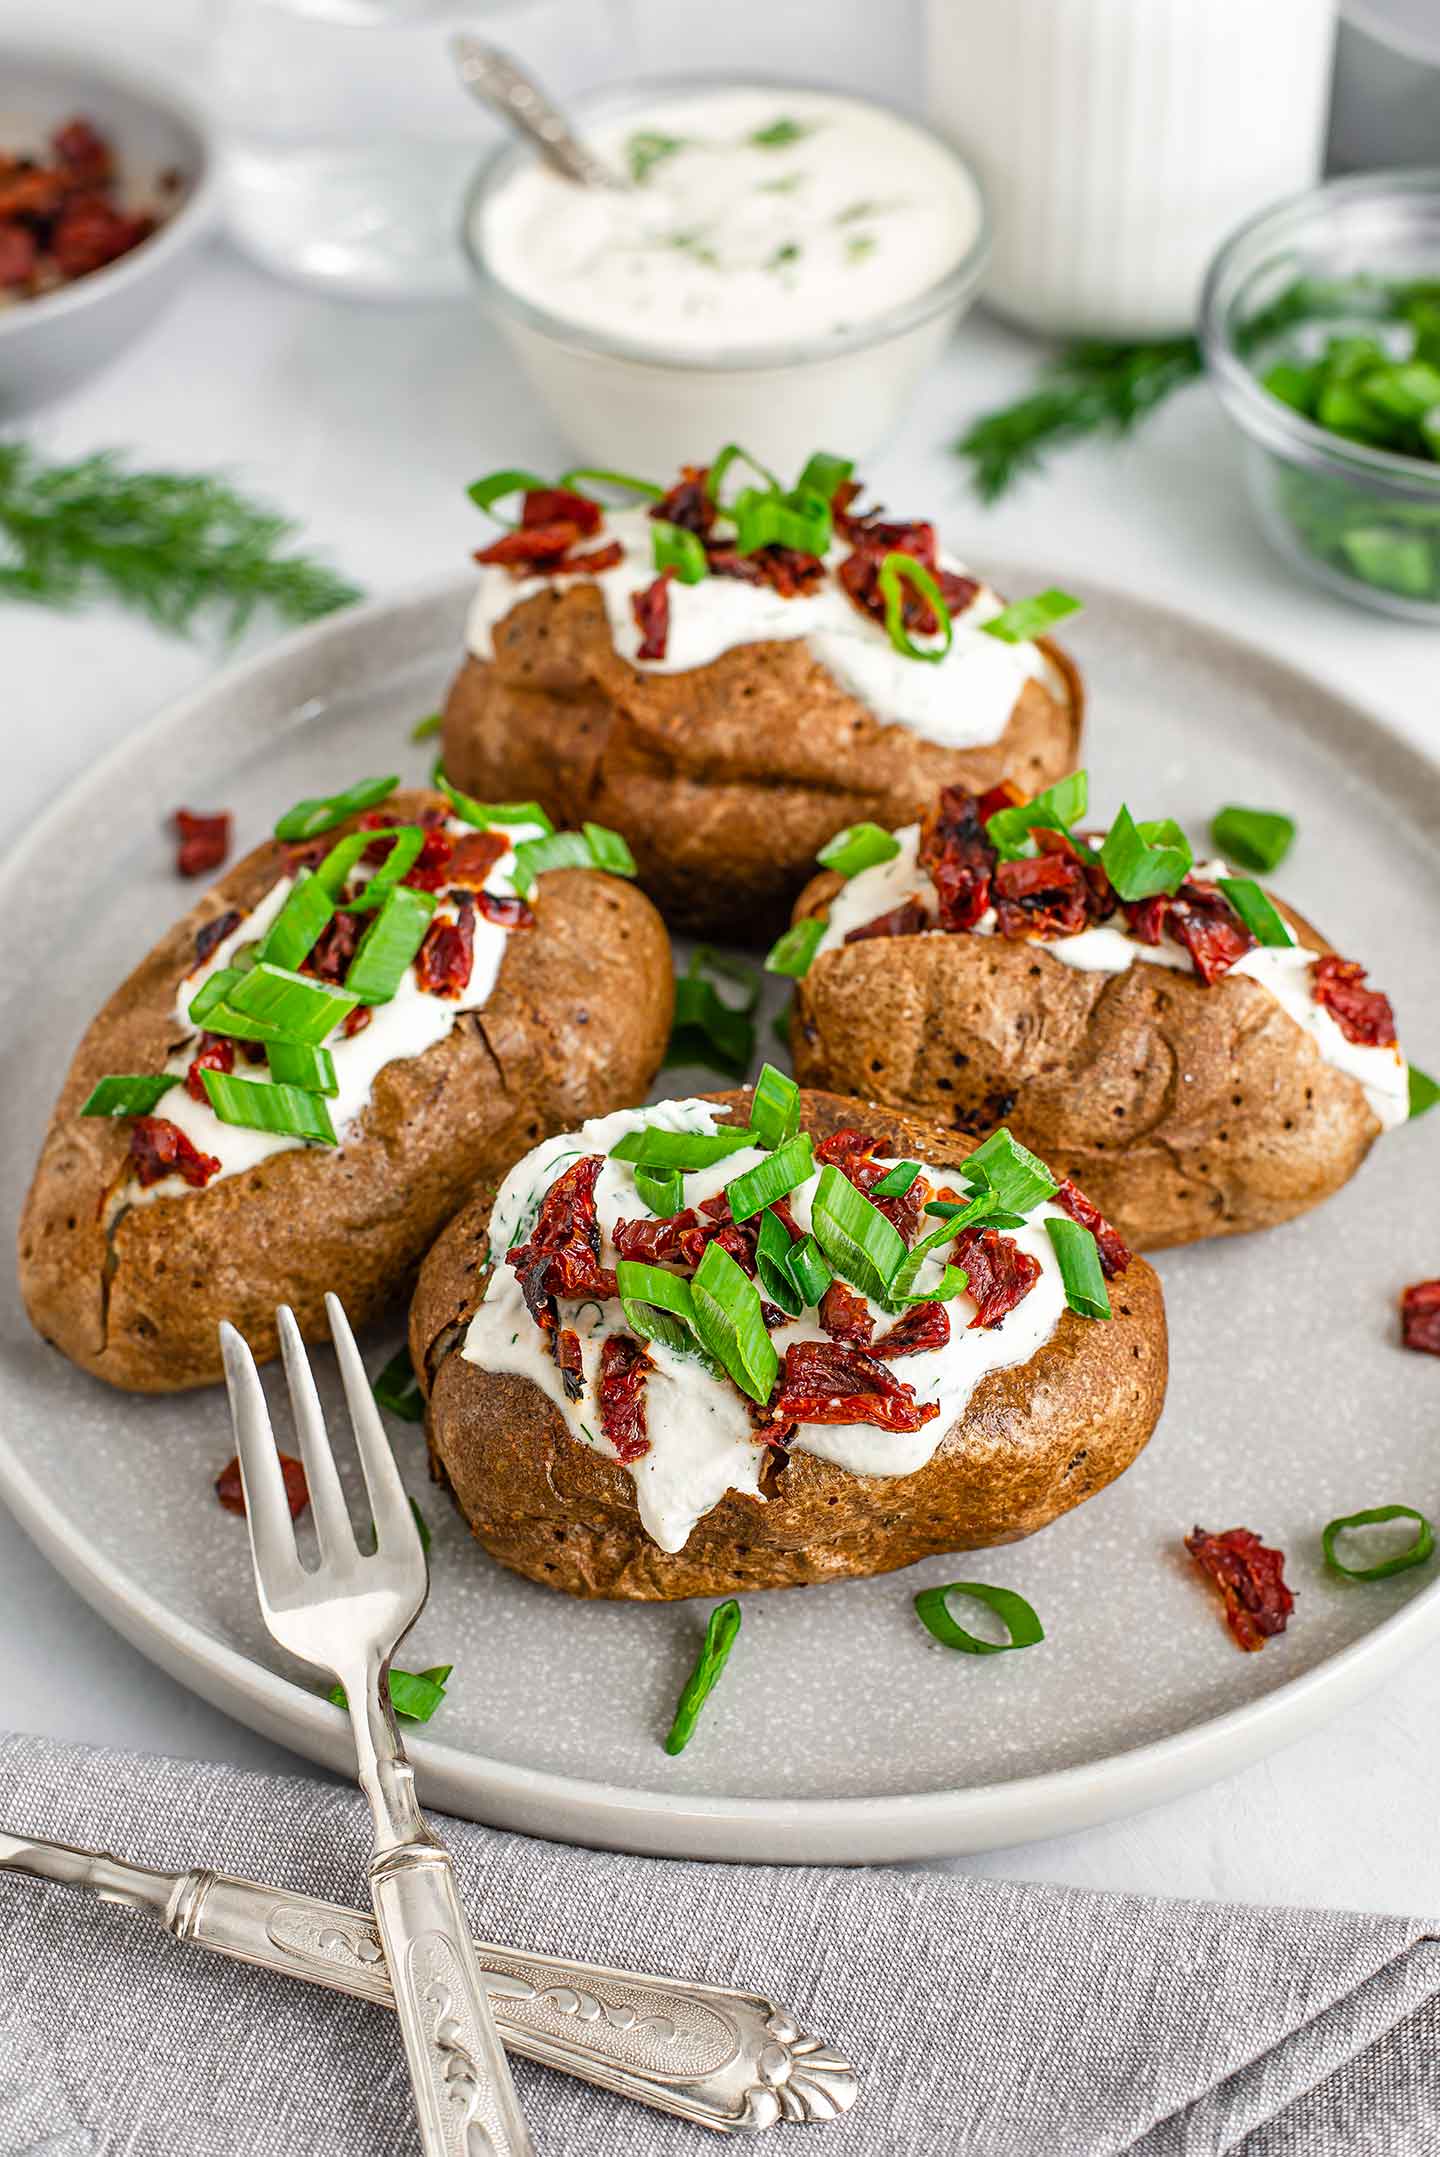 Top down view of 4 simple baked potatoes loaded with sour cream, sun-dried tomato vegan "bacon bits", and sliced green onion.